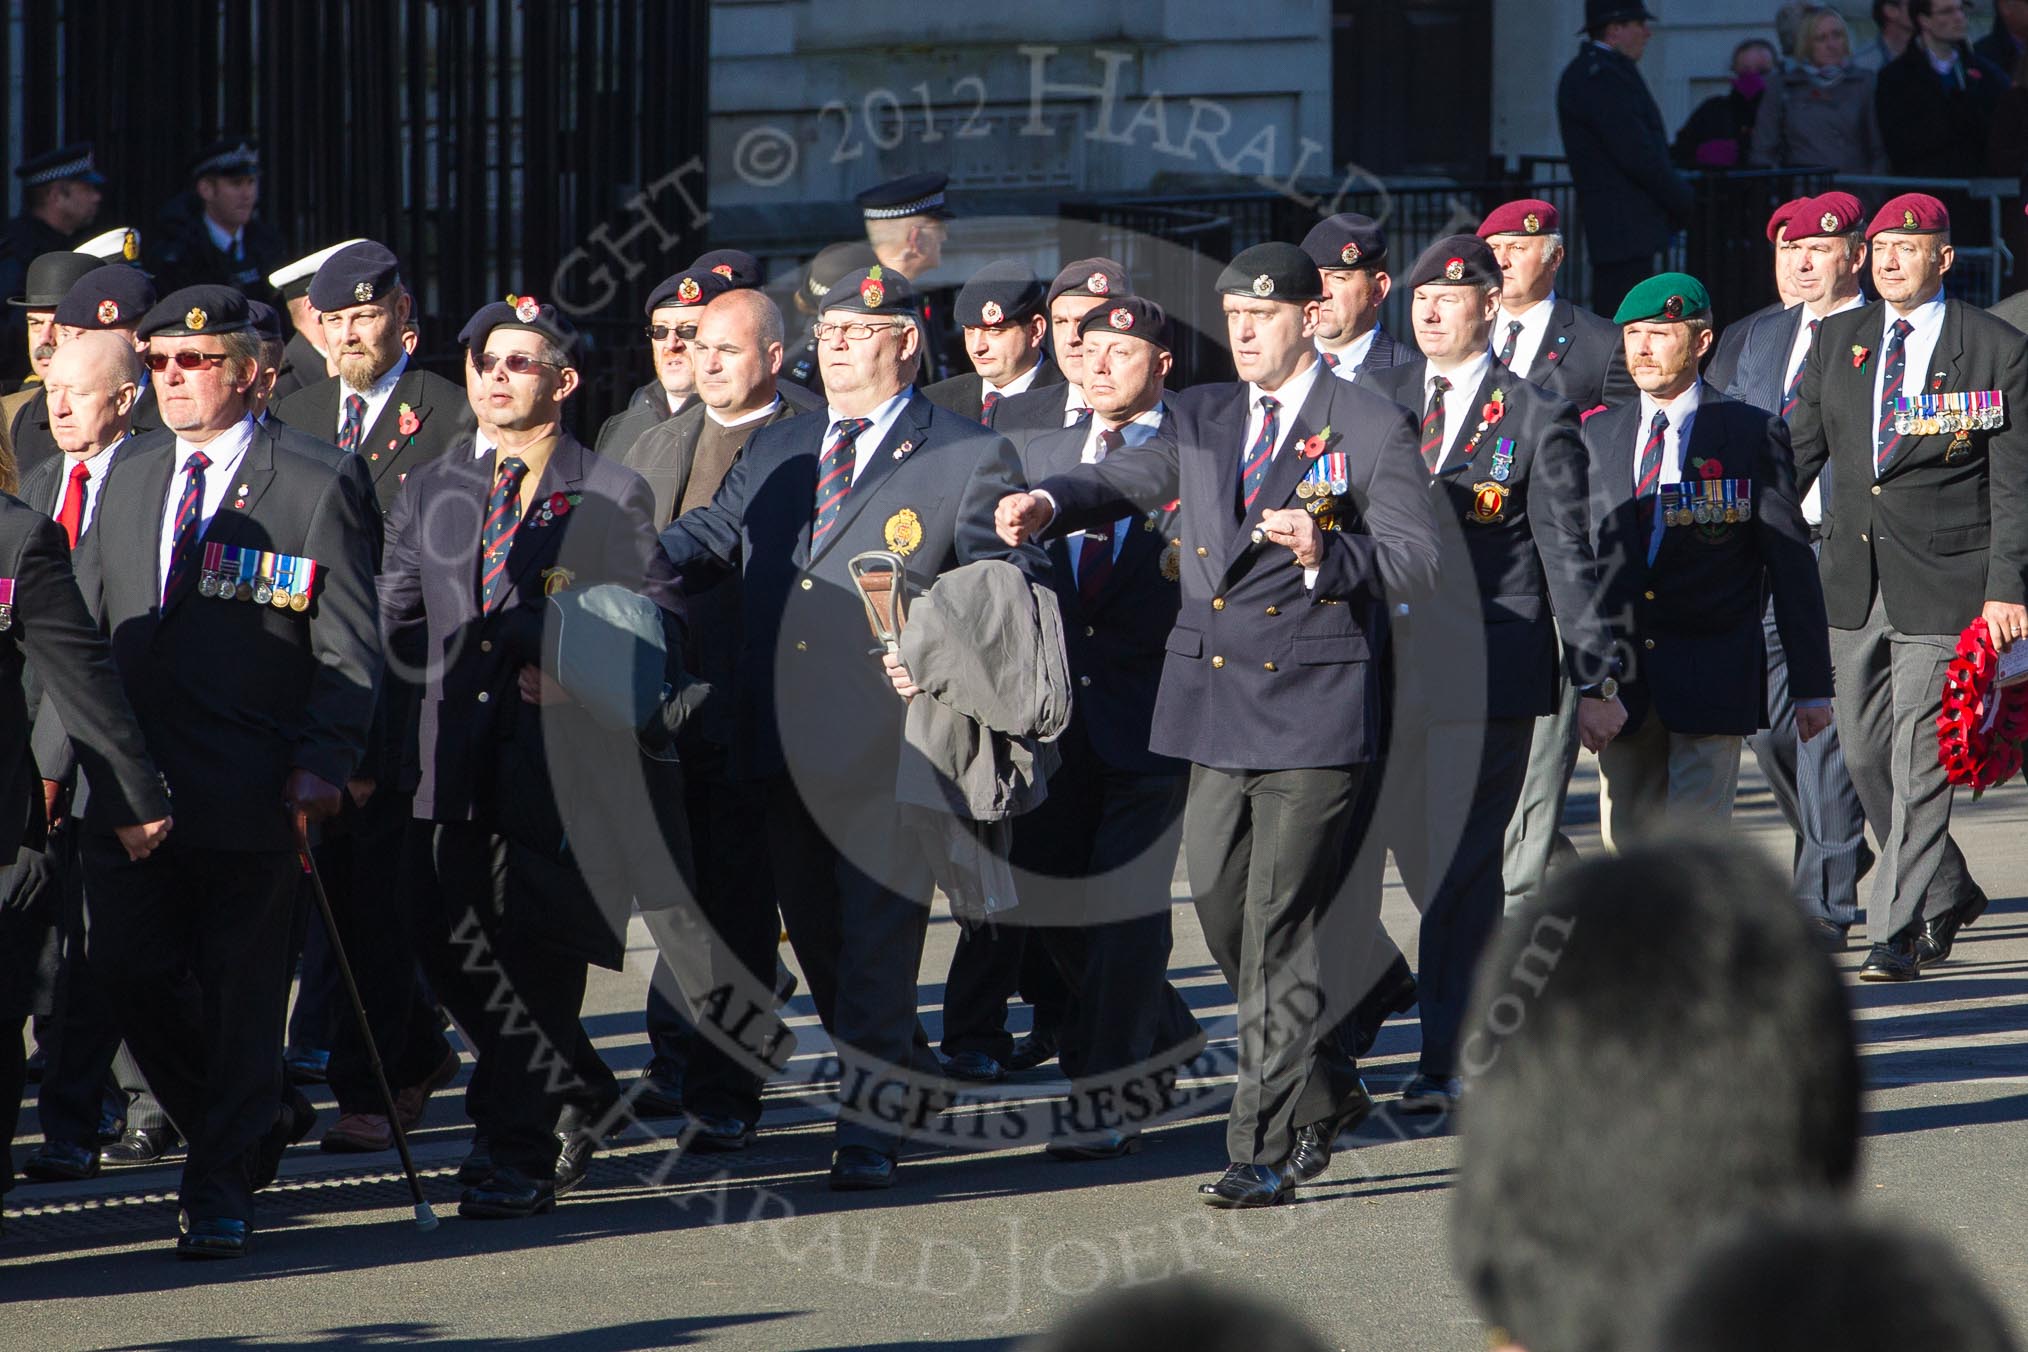 Remembrance Sunday 2012 Cenotaph March Past: Royal Engineers Bomb Disposal Association and B28 - Airborne Engineers Association..
Whitehall, Cenotaph,
London SW1,

United Kingdom,
on 11 November 2012 at 11:59, image #987